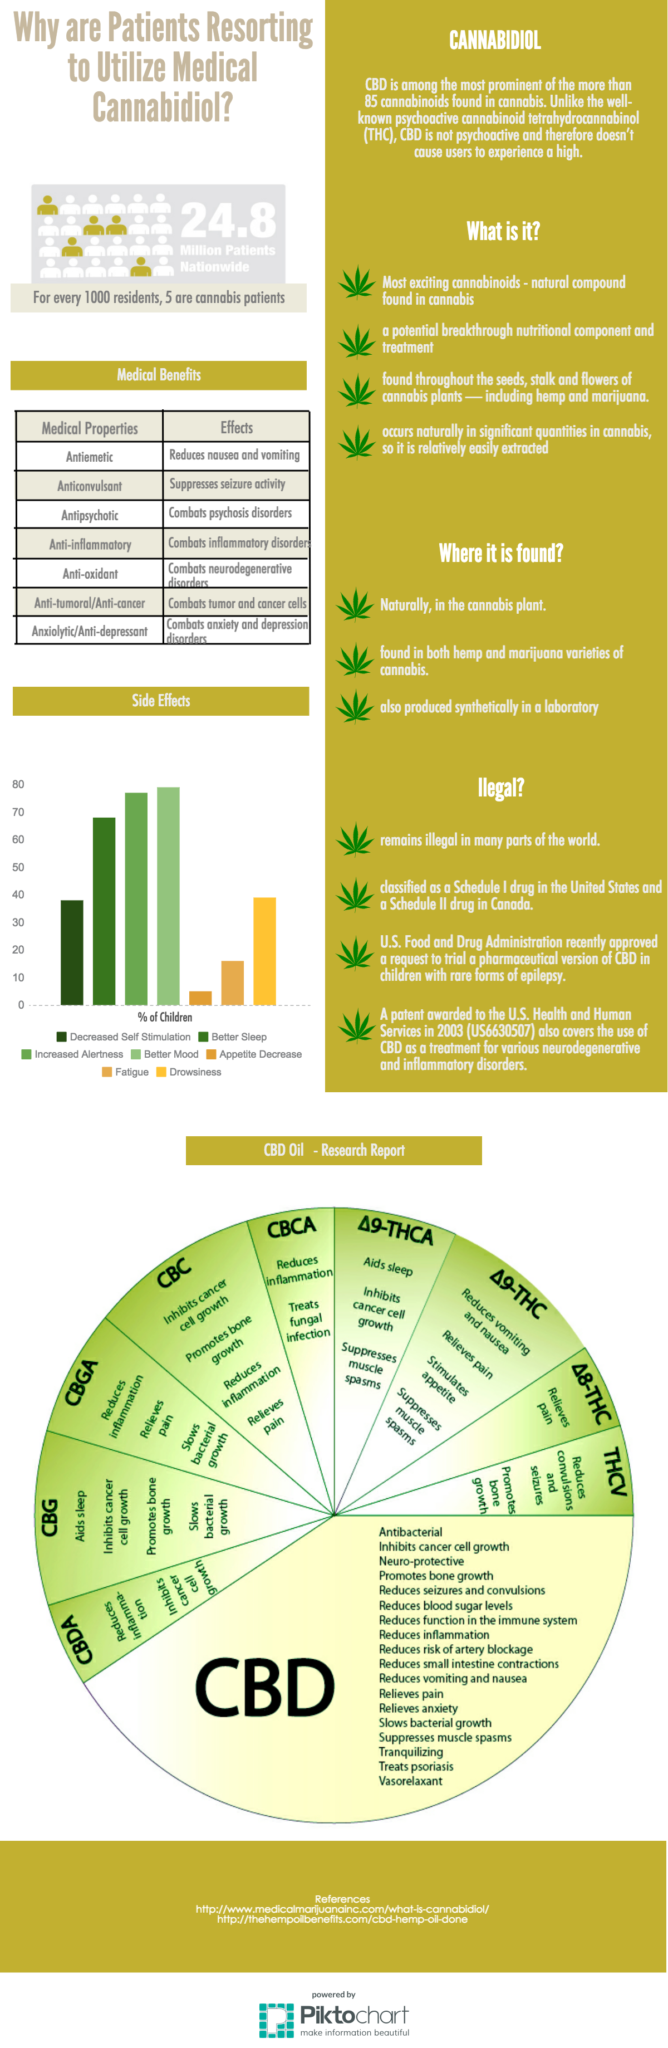 cbd infographic why patients are leaving big pharma